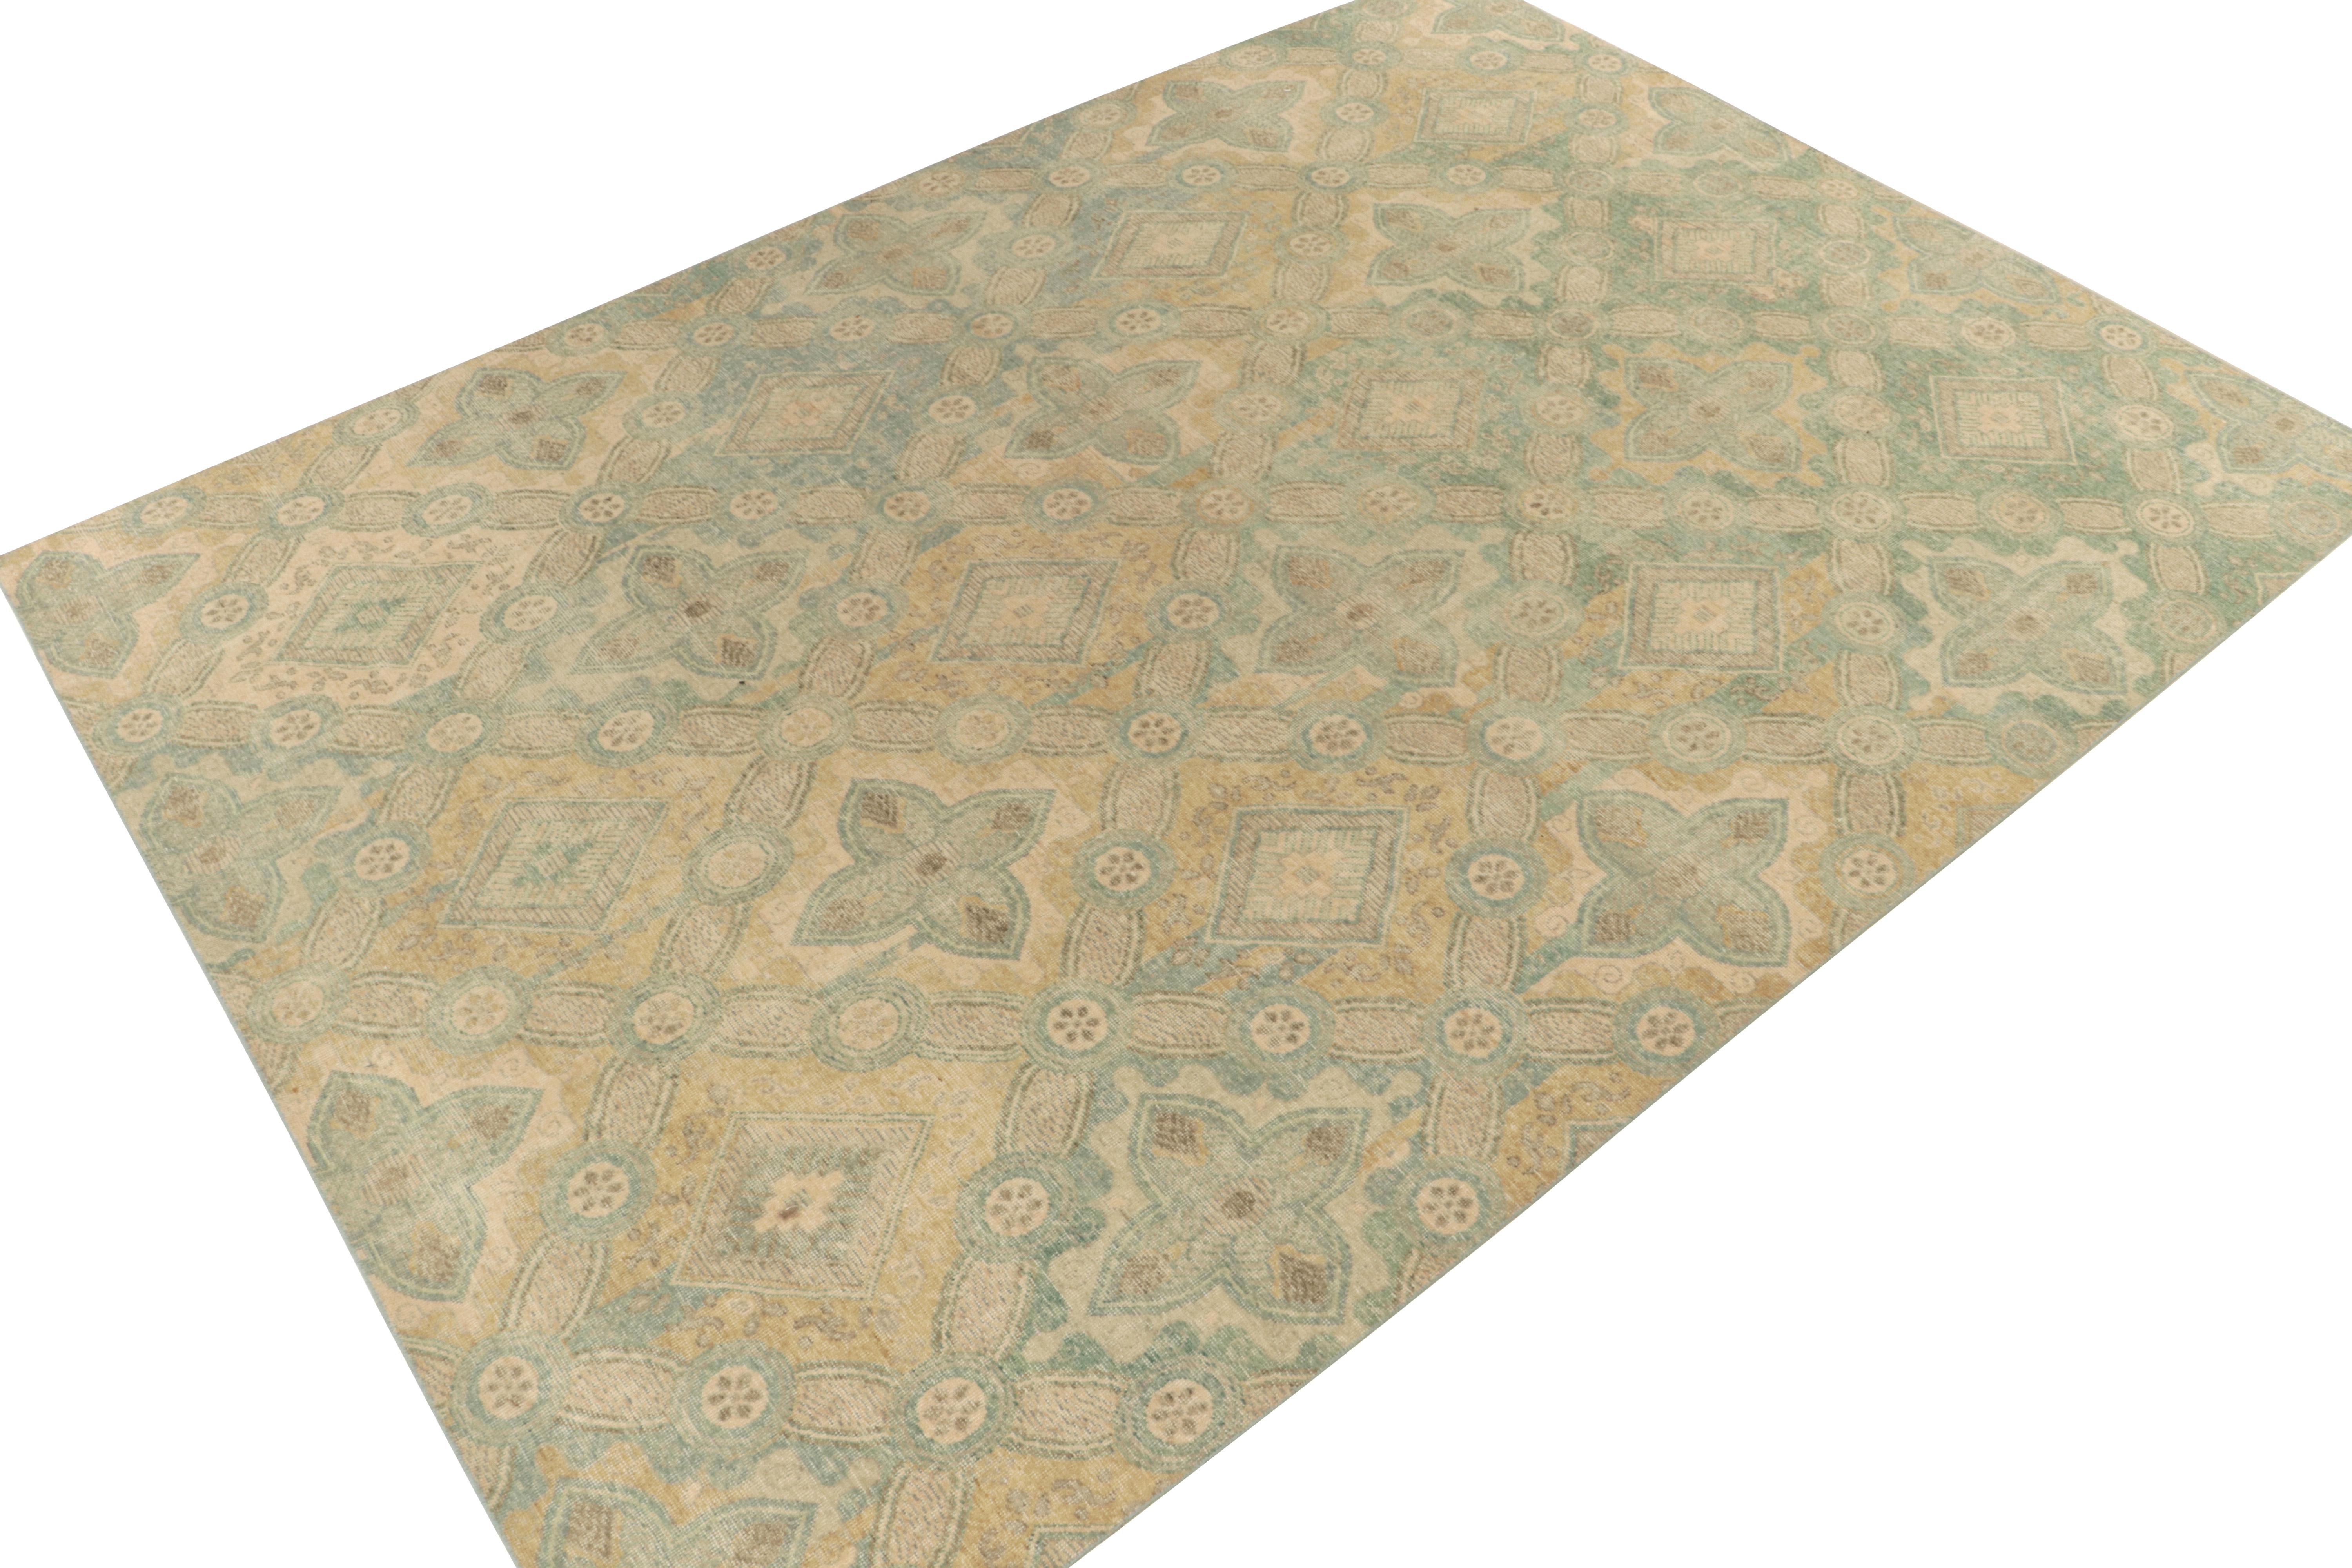 Belonging to our Homage collection, a 10x14 hand-knotted rug carrying a subtle yet impactful persona. The distressed vision manifests with sublime deco patterns relishing light greenish-blue & gentle gold blending beautifully for a shabby chic